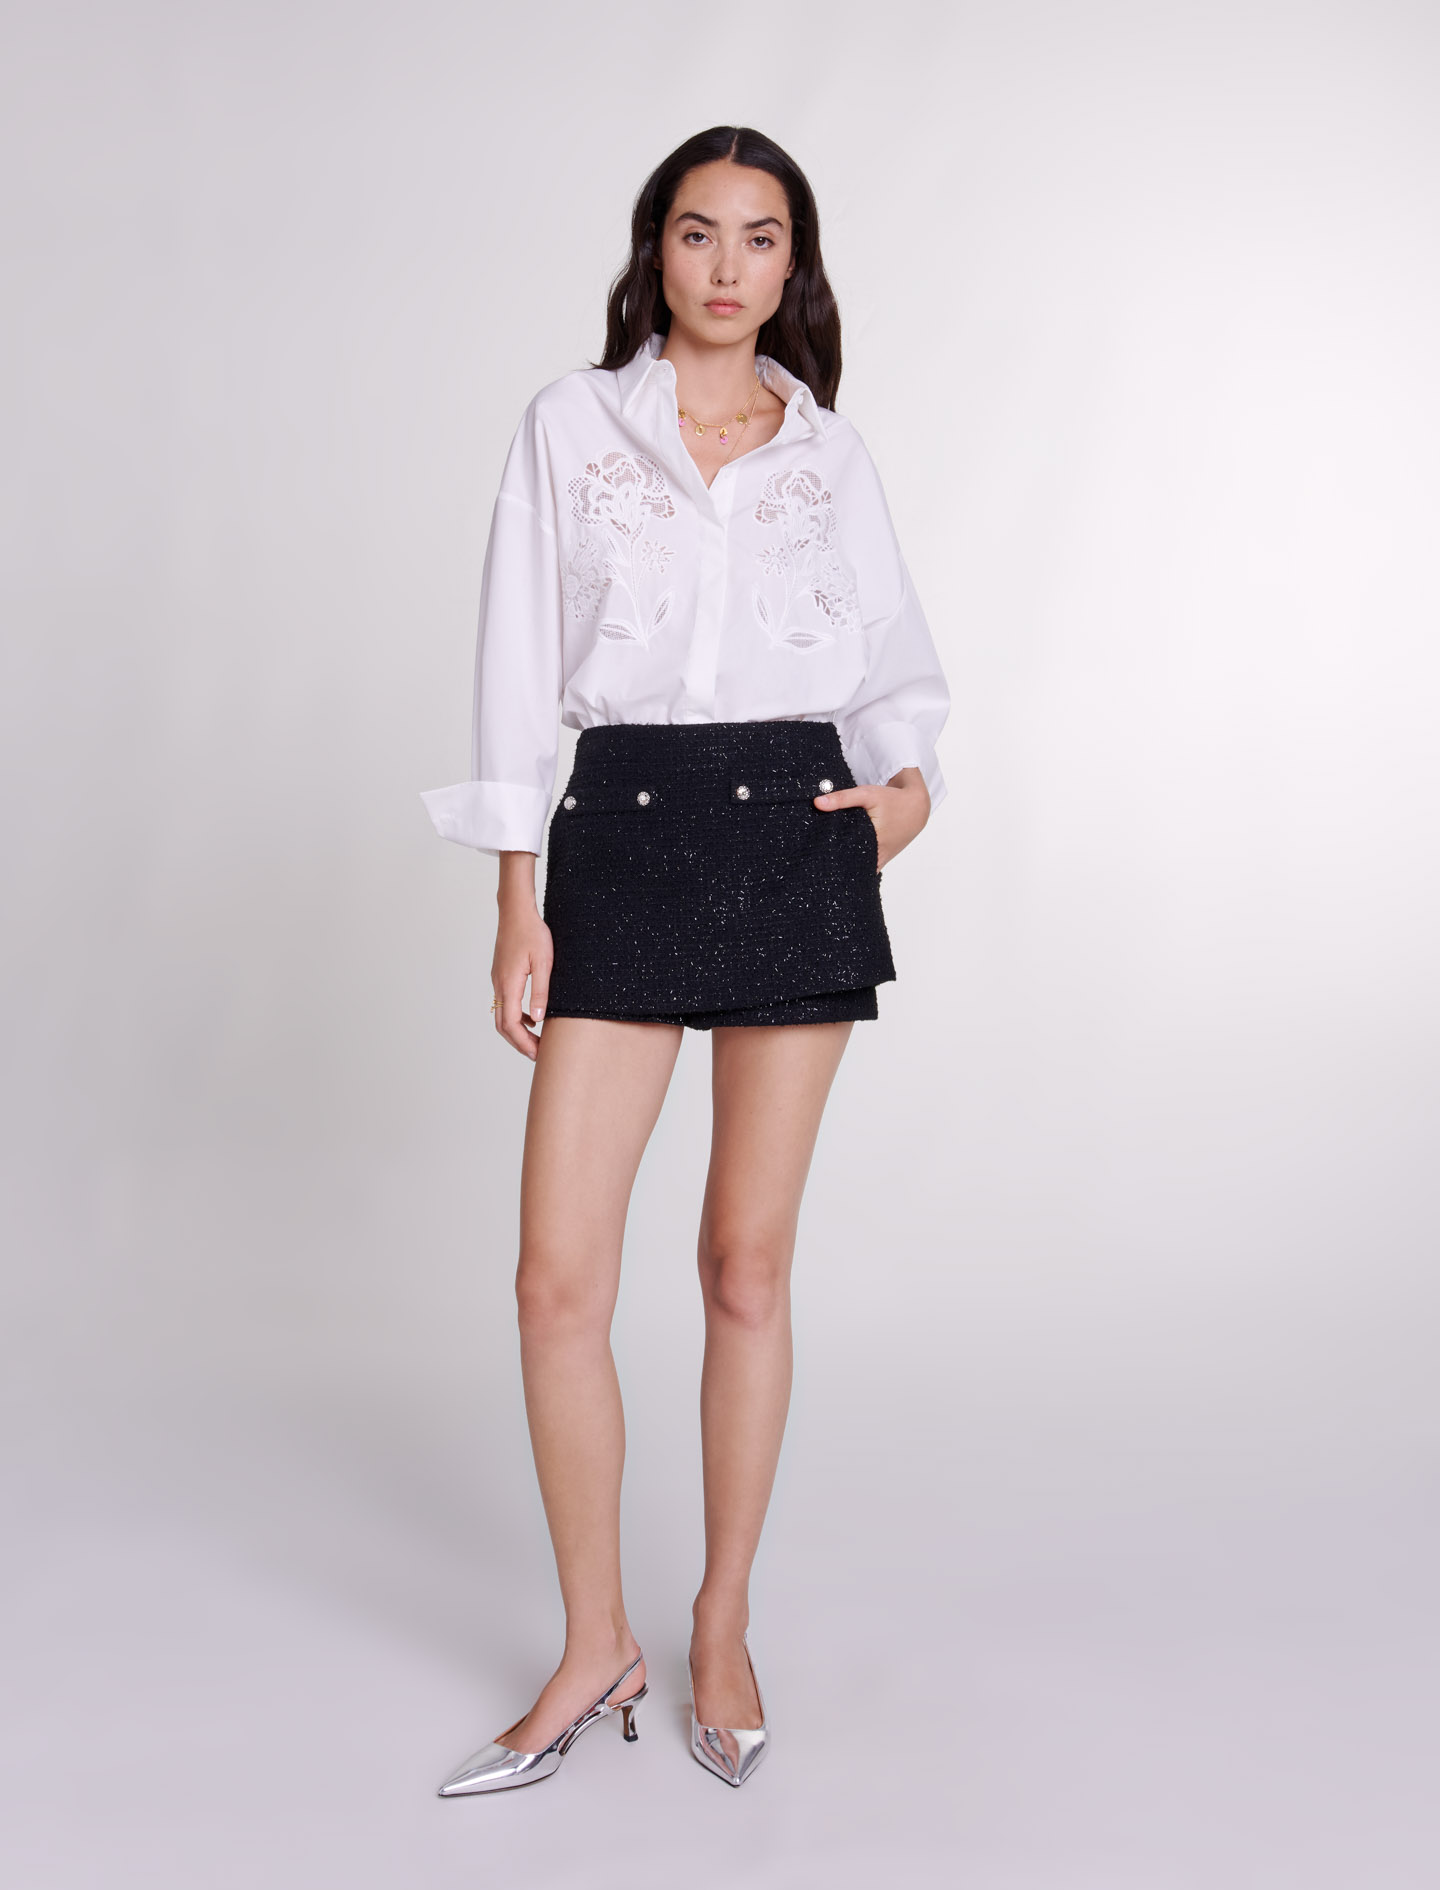 Maje Woman's cotton, Tweed shorts for Spring/Summer, in color Black / Black